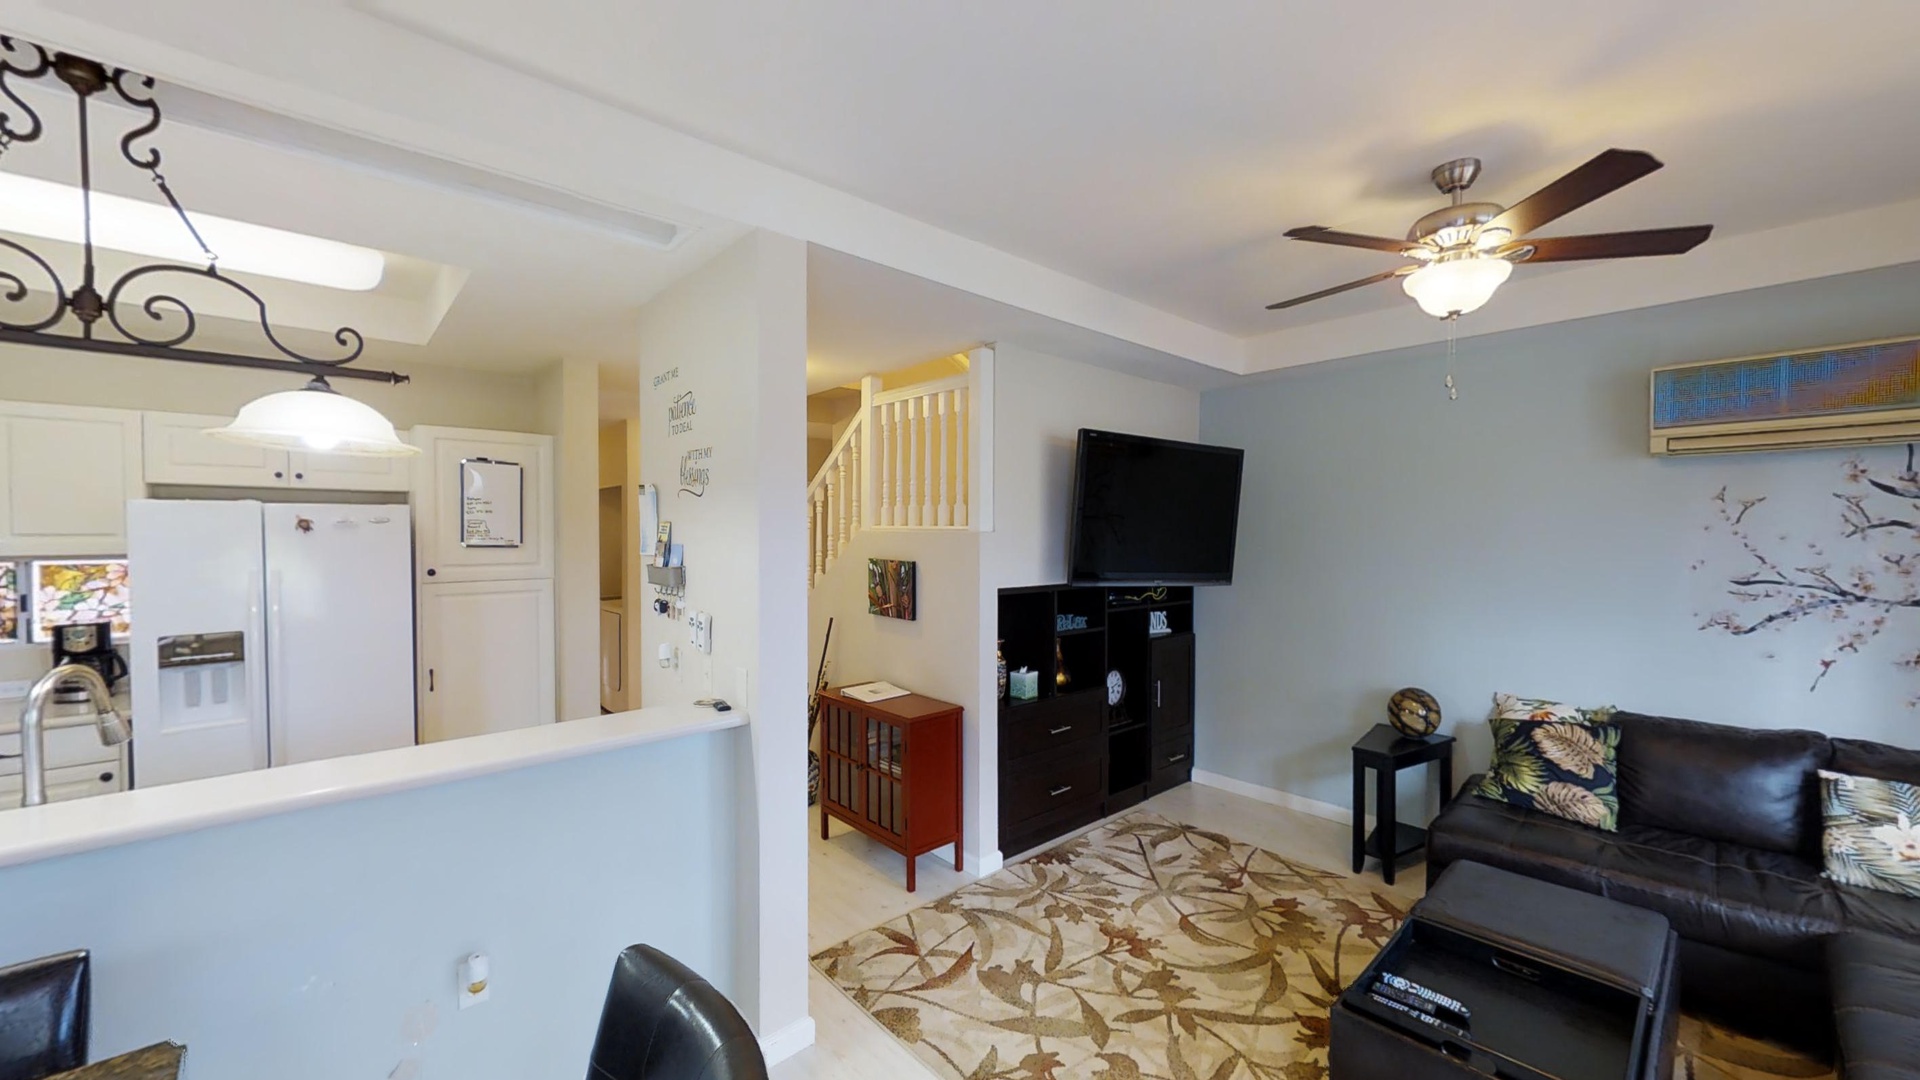 Kapolei Vacation Rentals, Fairways at Ko Olina 8G - The open floor plan with a TV and storage space.